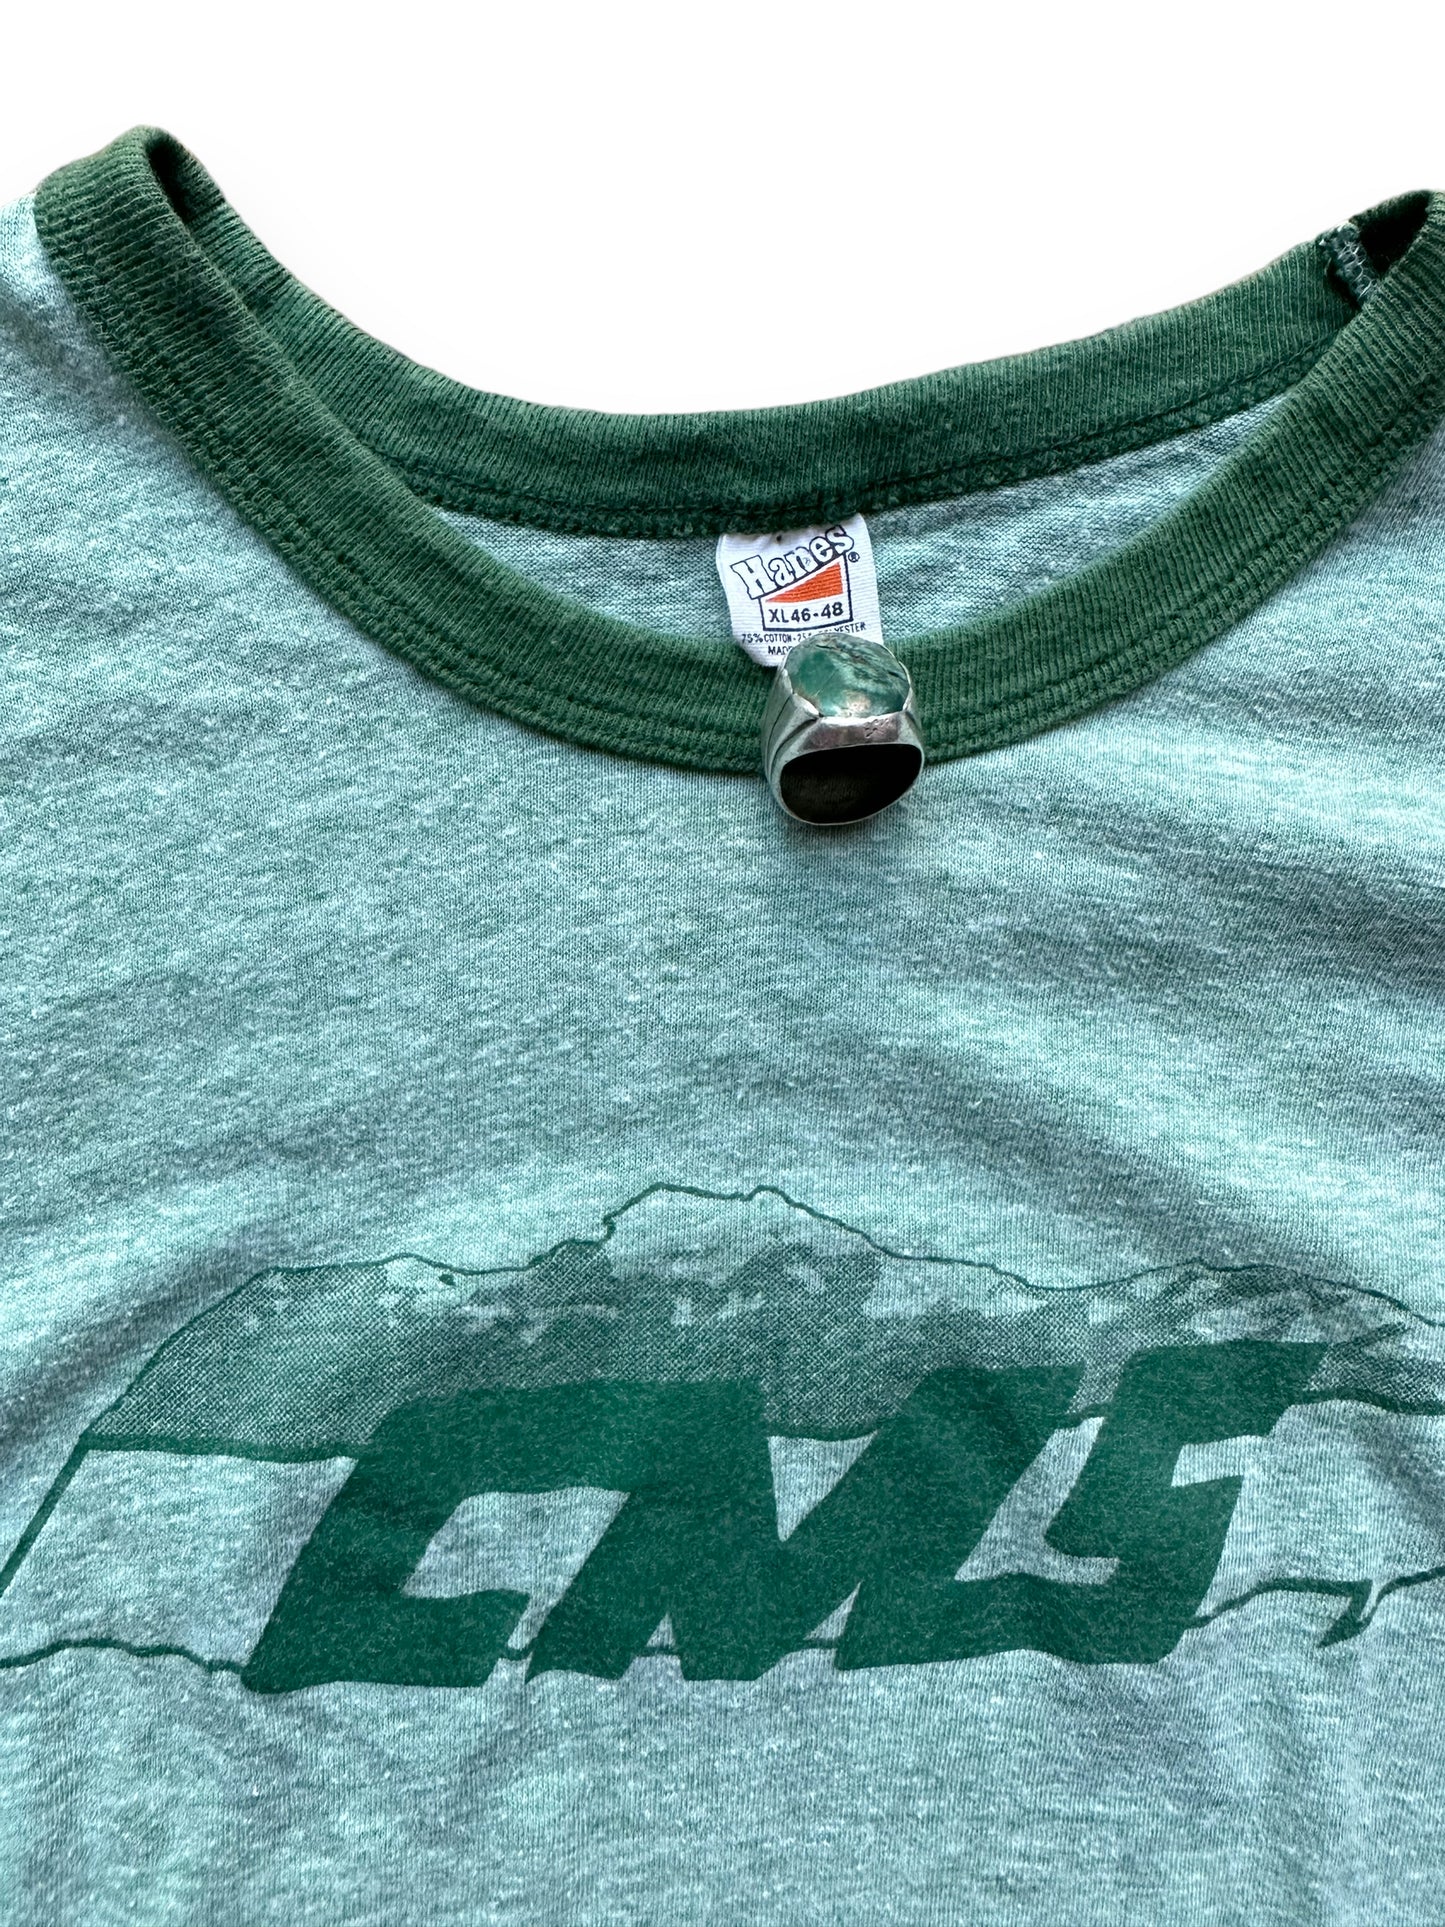 Tag View of Vintage Cascade Moving Green Ringer Tee SZ XL | Vintage Graphic T-Shirts Seattle | Barn Owl Vintage Tees Seattle